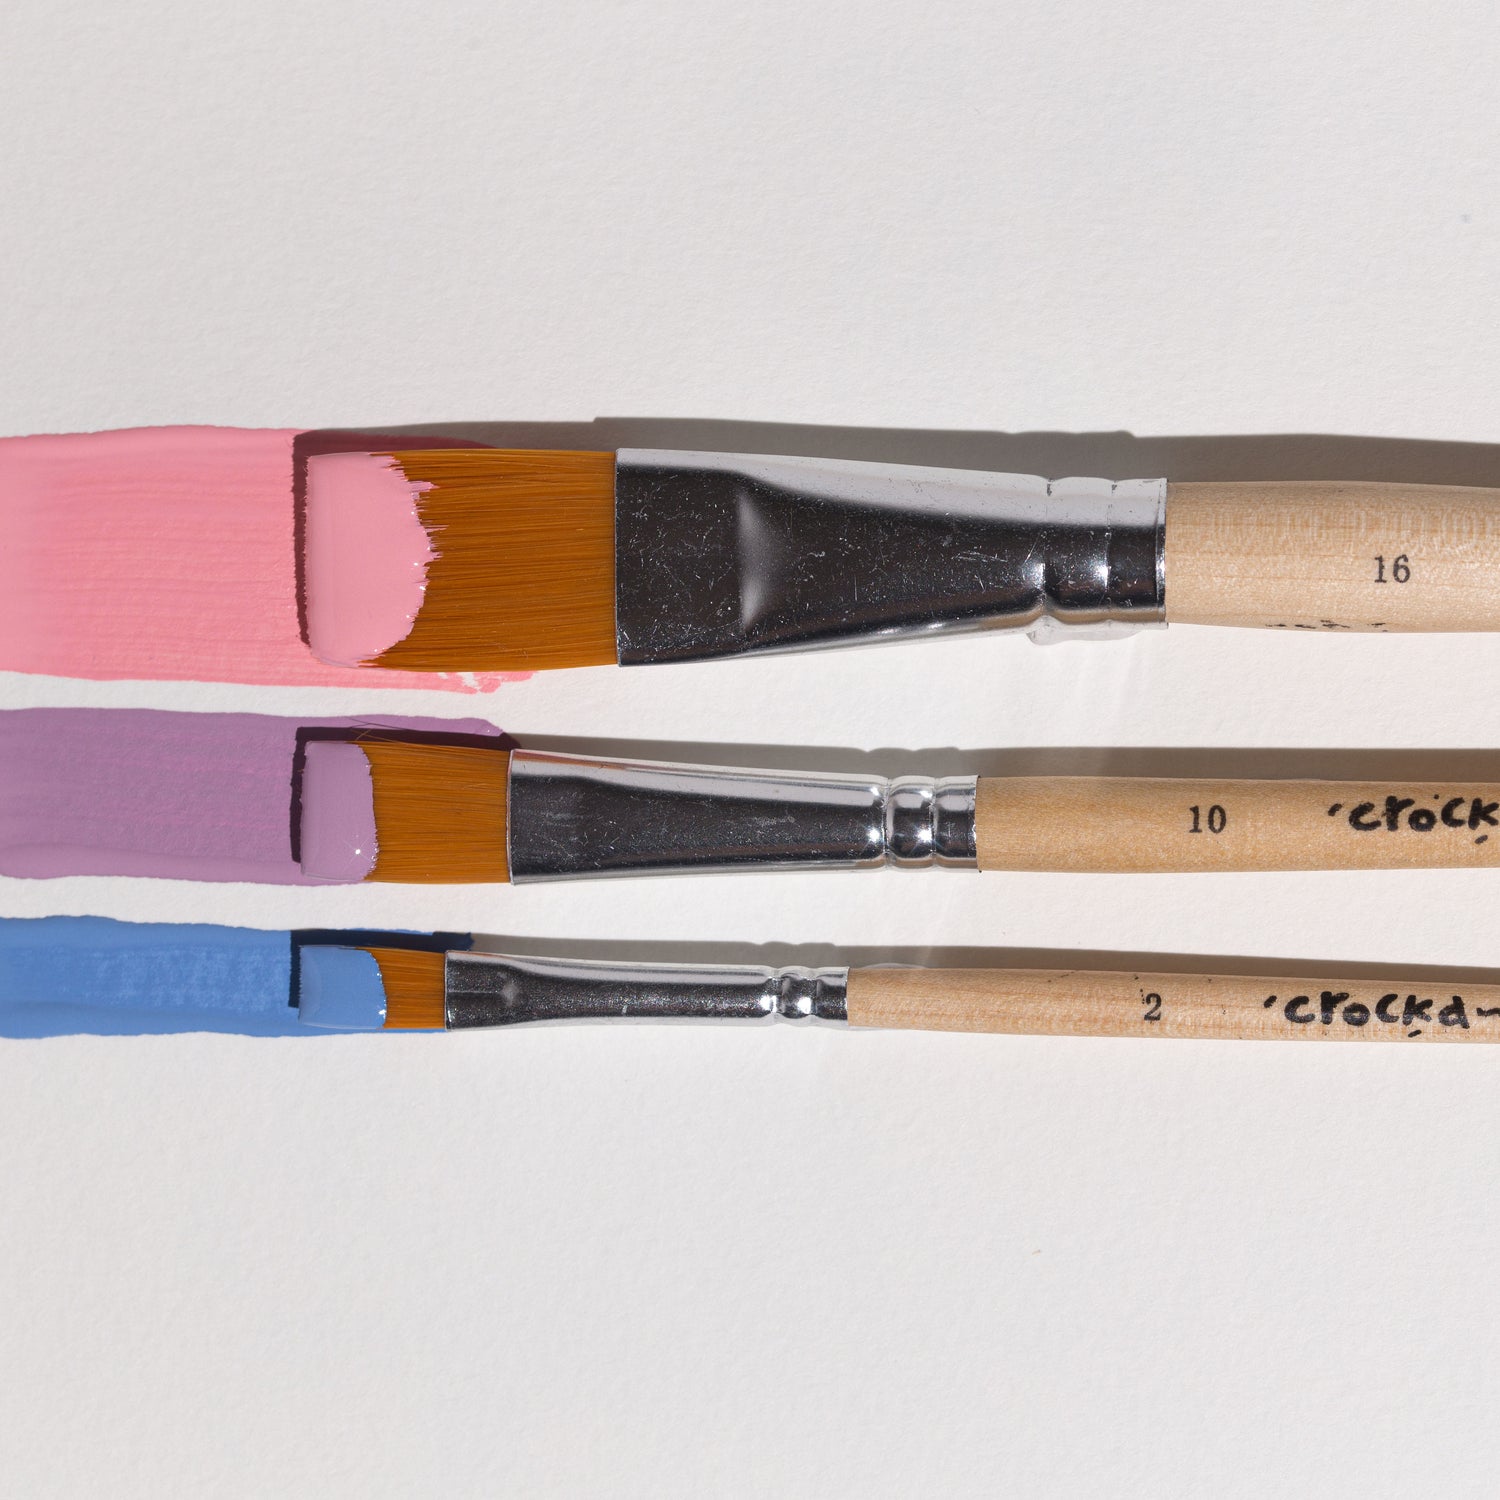 Crockd paint brushes with paint on them lying against each other